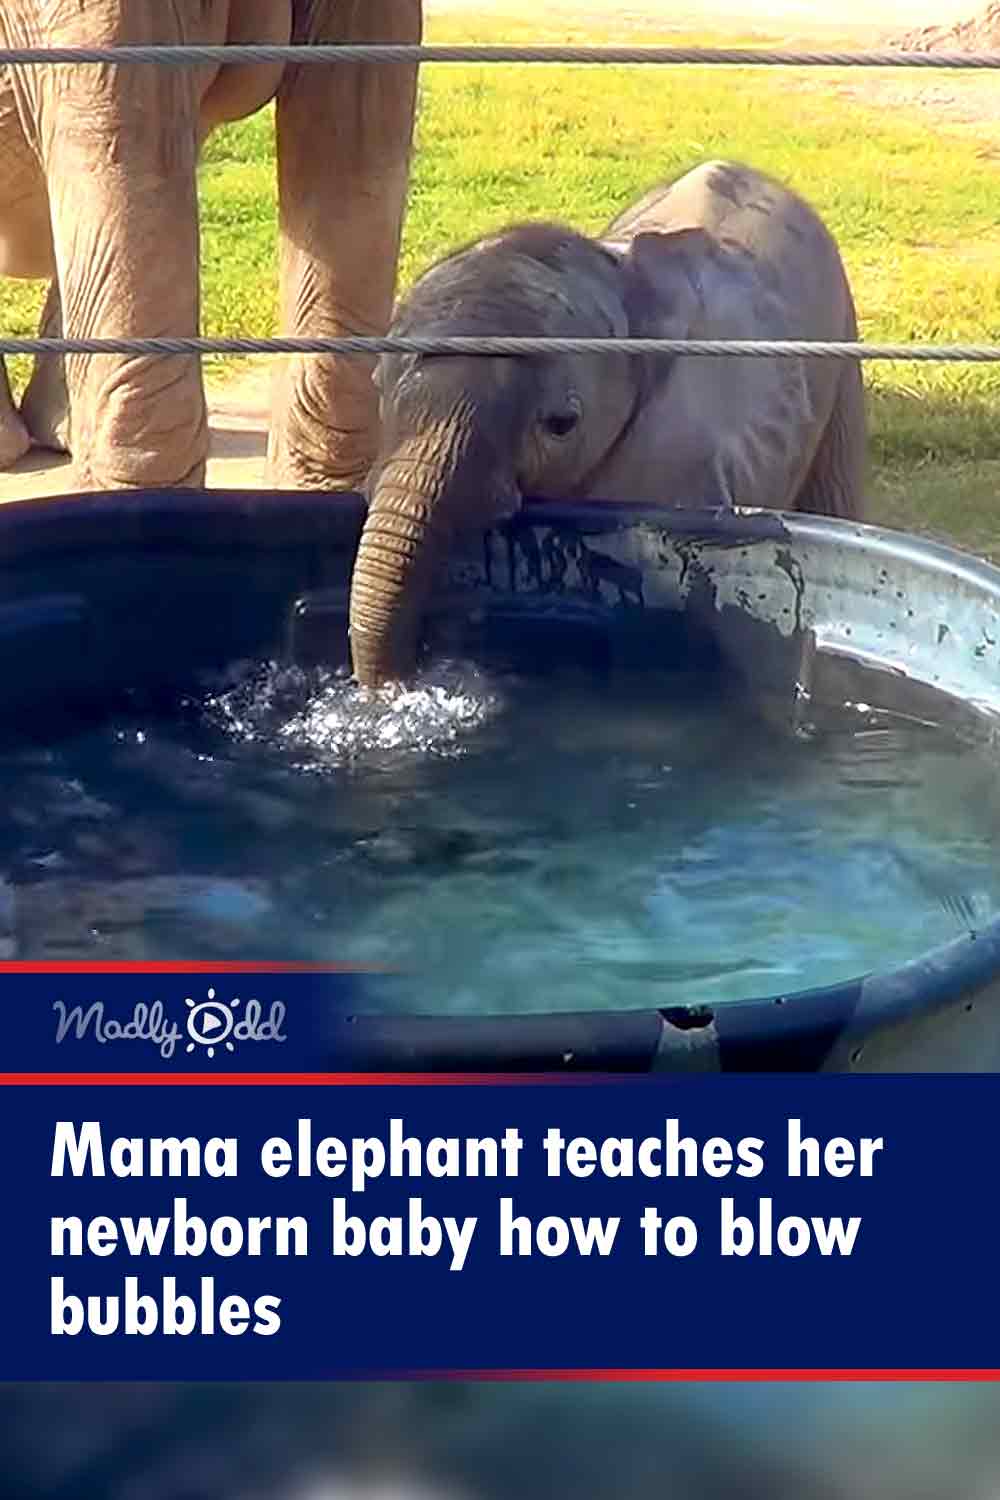 Mama elephant teaches her newborn baby how to blow bubbles